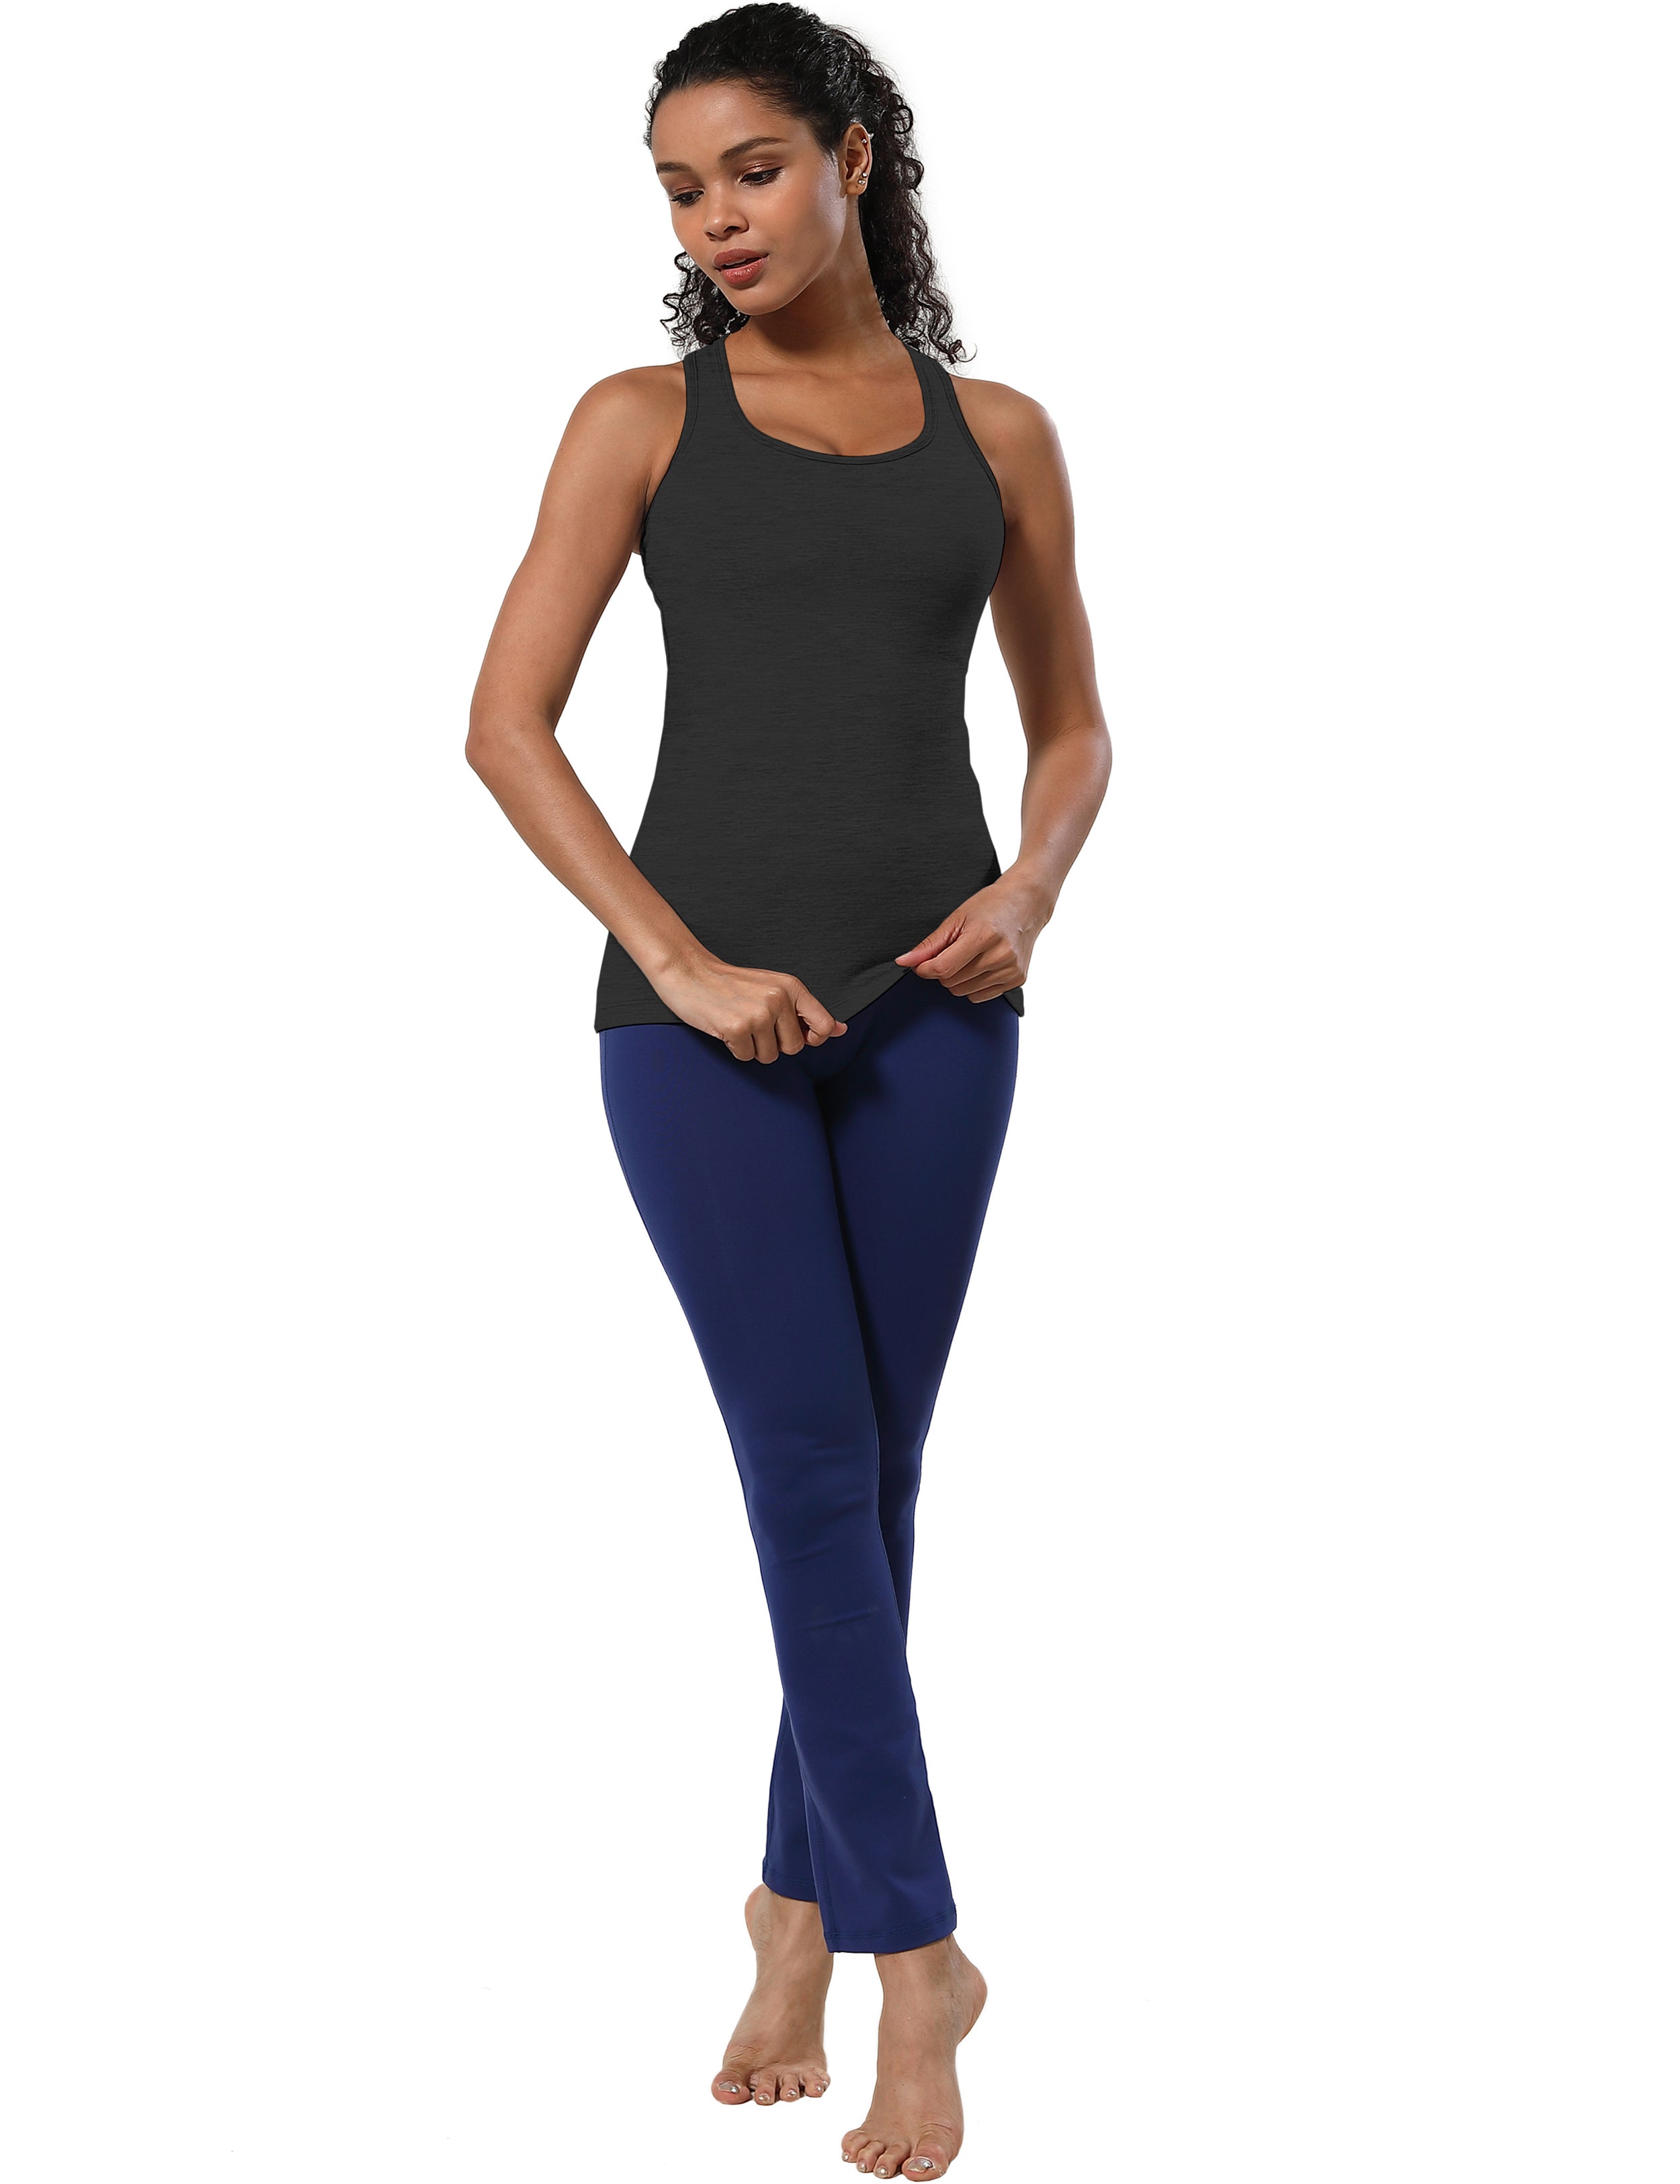 Racerback Athletic Tank Tops heathercharcoal 92%Nylon/8%Spandex(Cotton Soft) Designed for Yoga Tight Fit So buttery soft, it feels weightless Sweat-wicking Four-way stretch Breathable Contours your body Sits below the waistband for moderate, everyday coverage